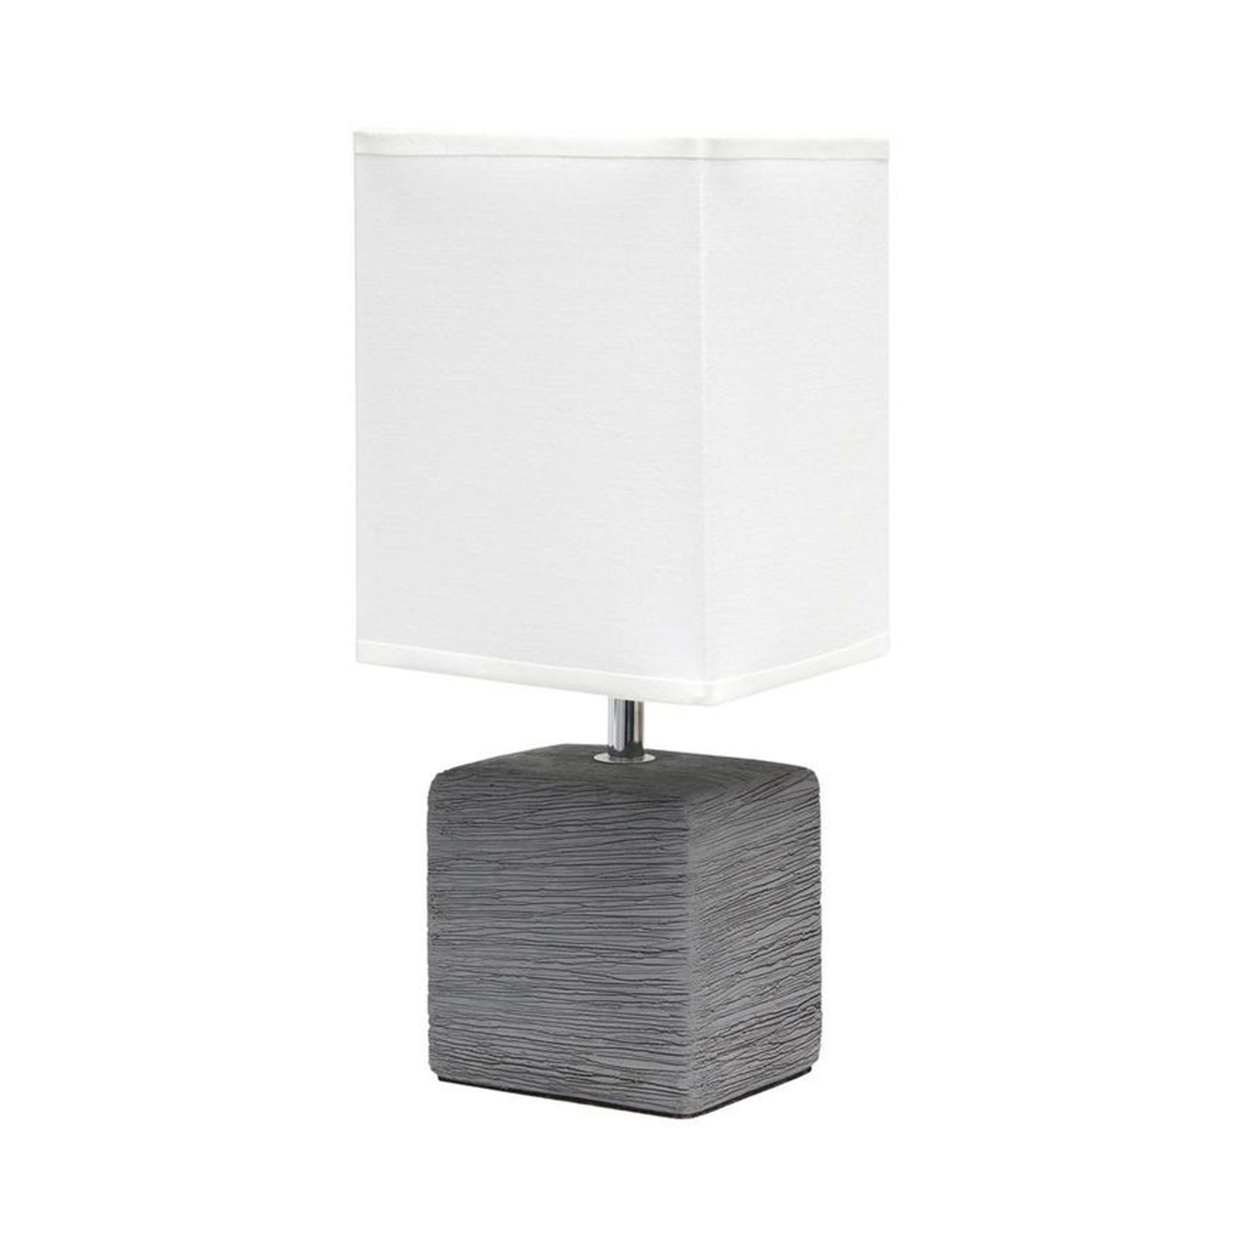 Simple Designs Petite Faux Stone Table Lamp with Fabric Shade, Gray with White Shade